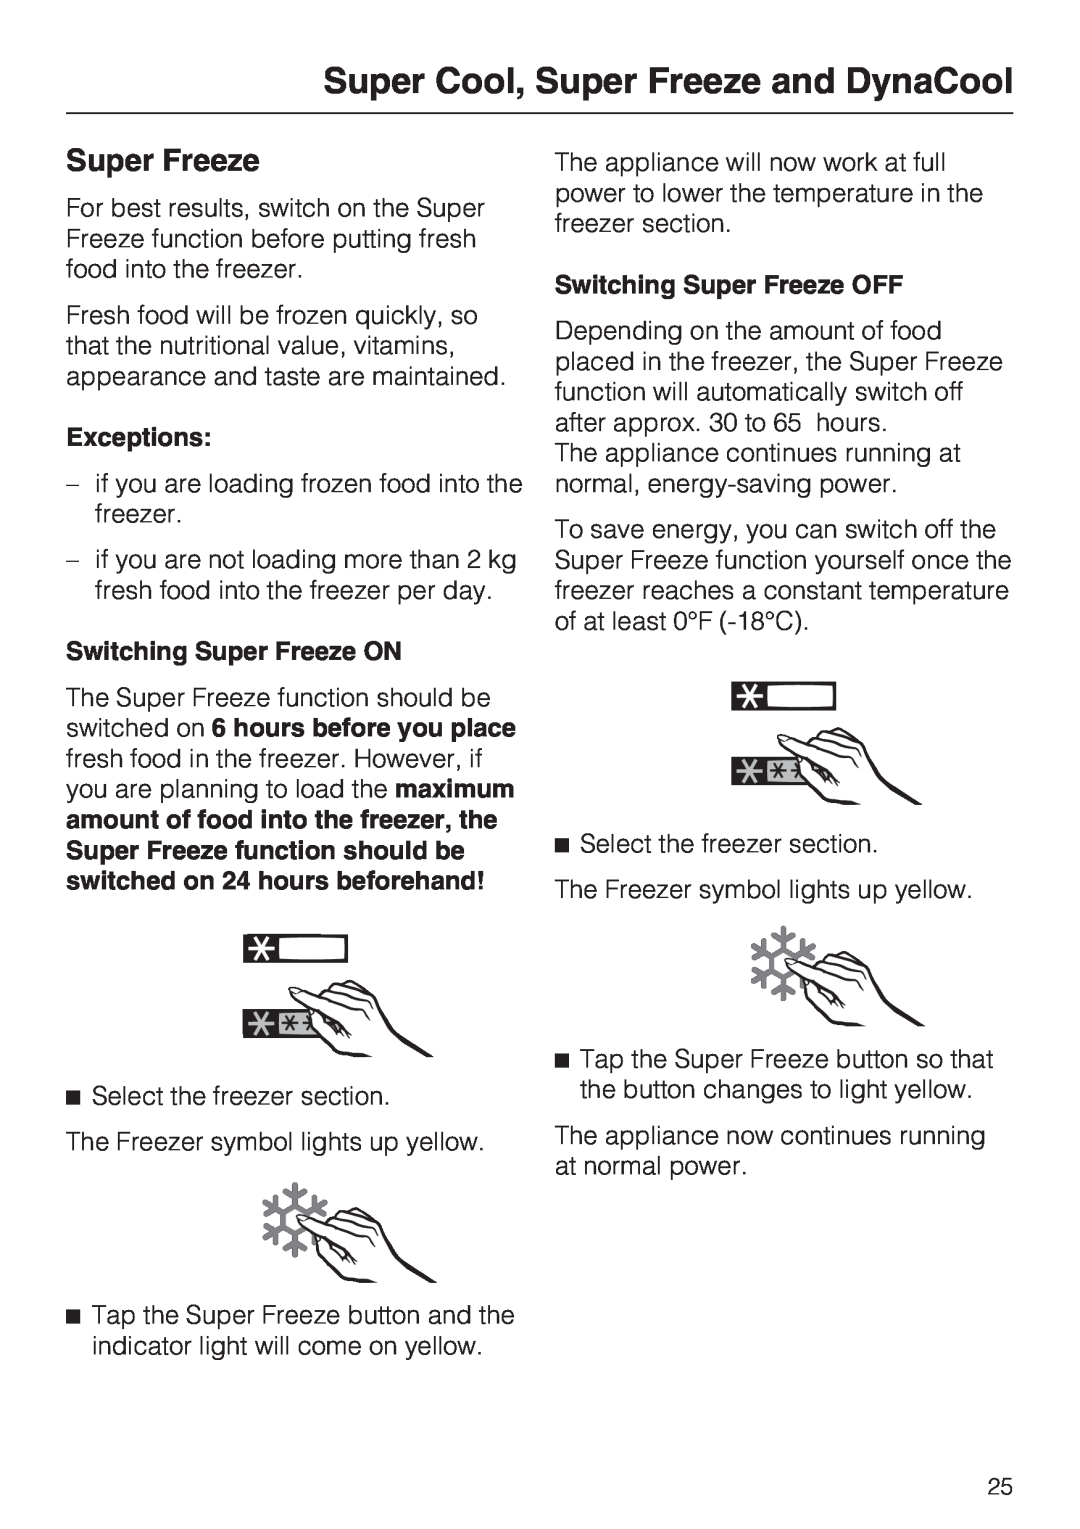 Miele KFN 14943 SDE ED installation instructions Exceptions, Switching Super Freeze ON, Switching Super Freeze OFF 